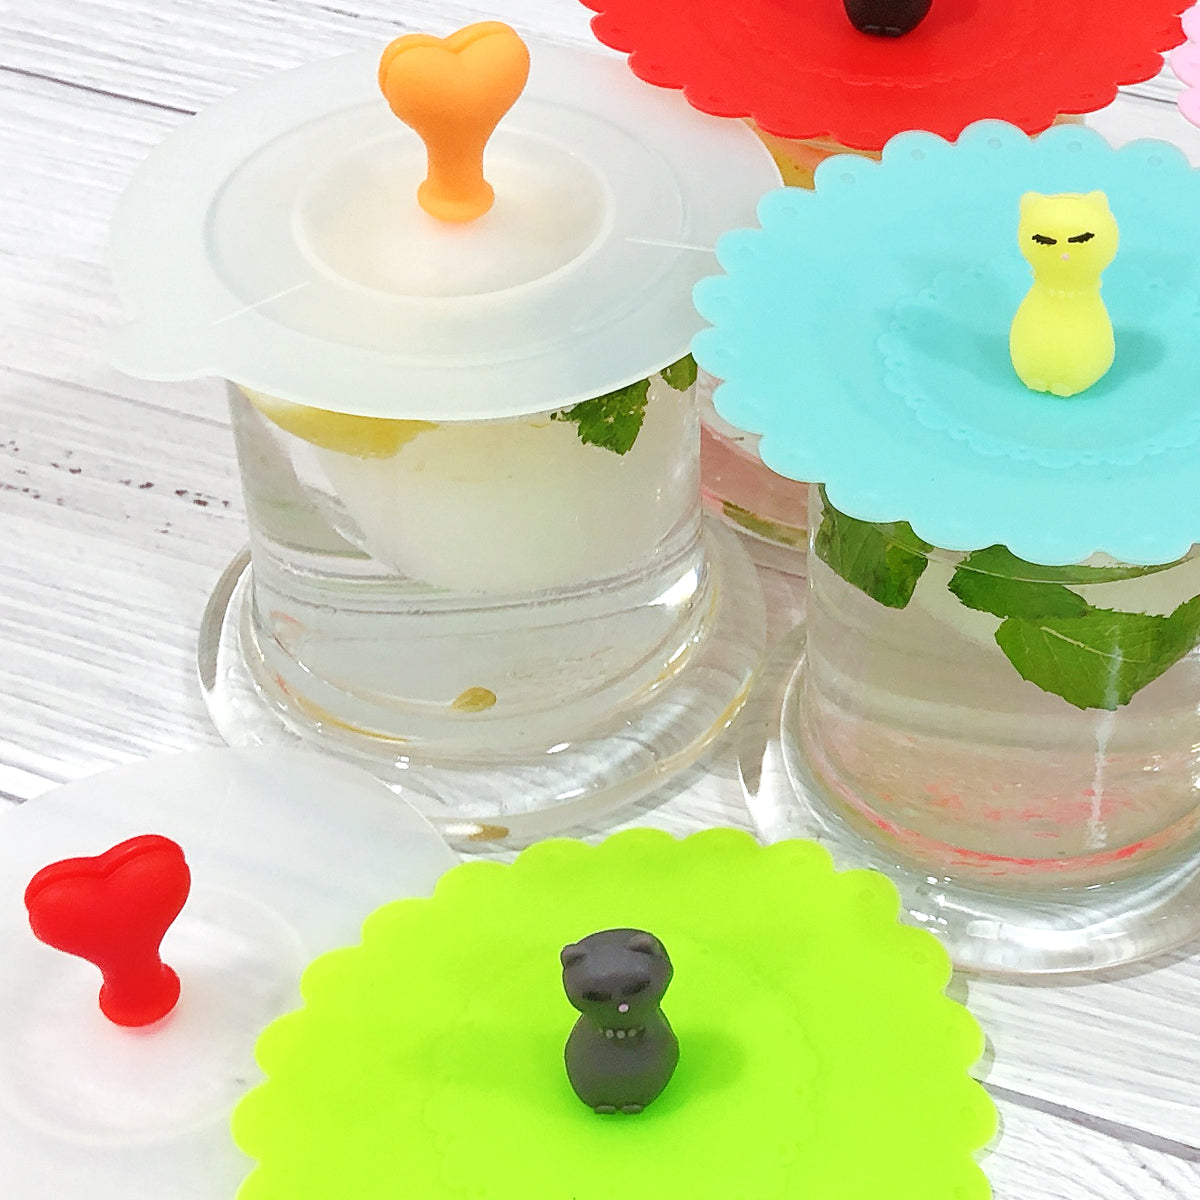 3 PACK Silicone Mug Lids Food Grade Rabbit Ear Silicone Mug Cover for Mugs  Tea Cups Hot Cup Lids Coffee Cup